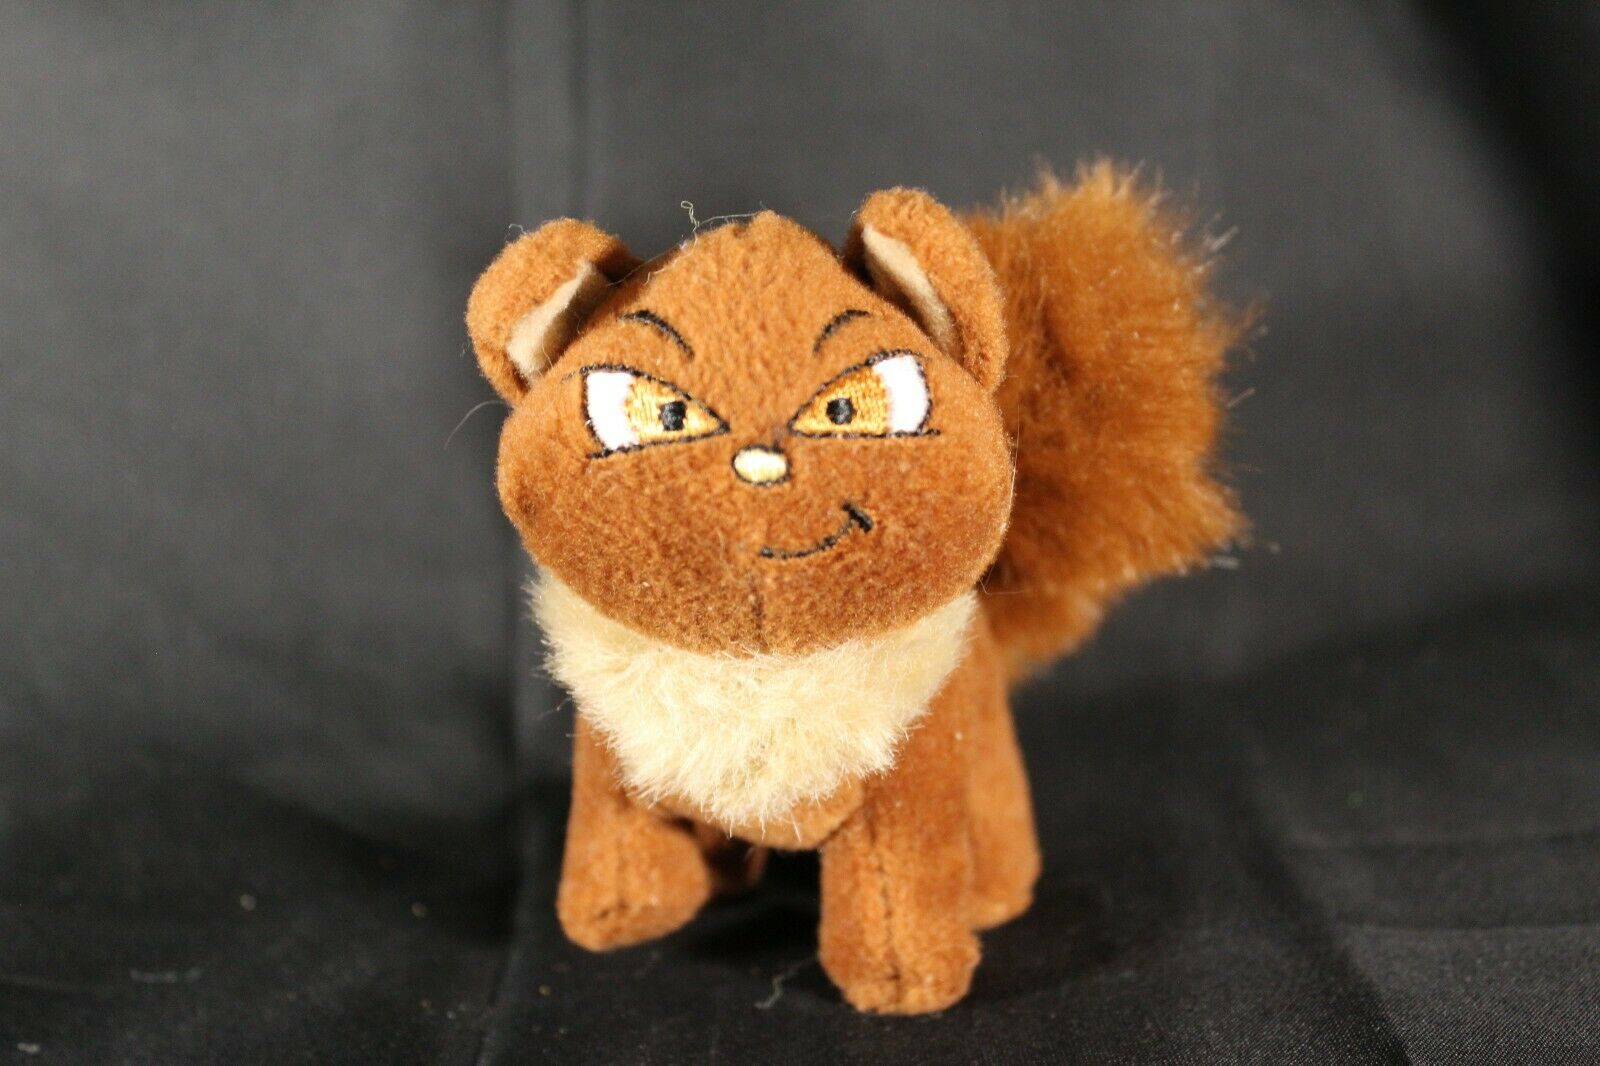 Neopets Small Plush Without Tags #6